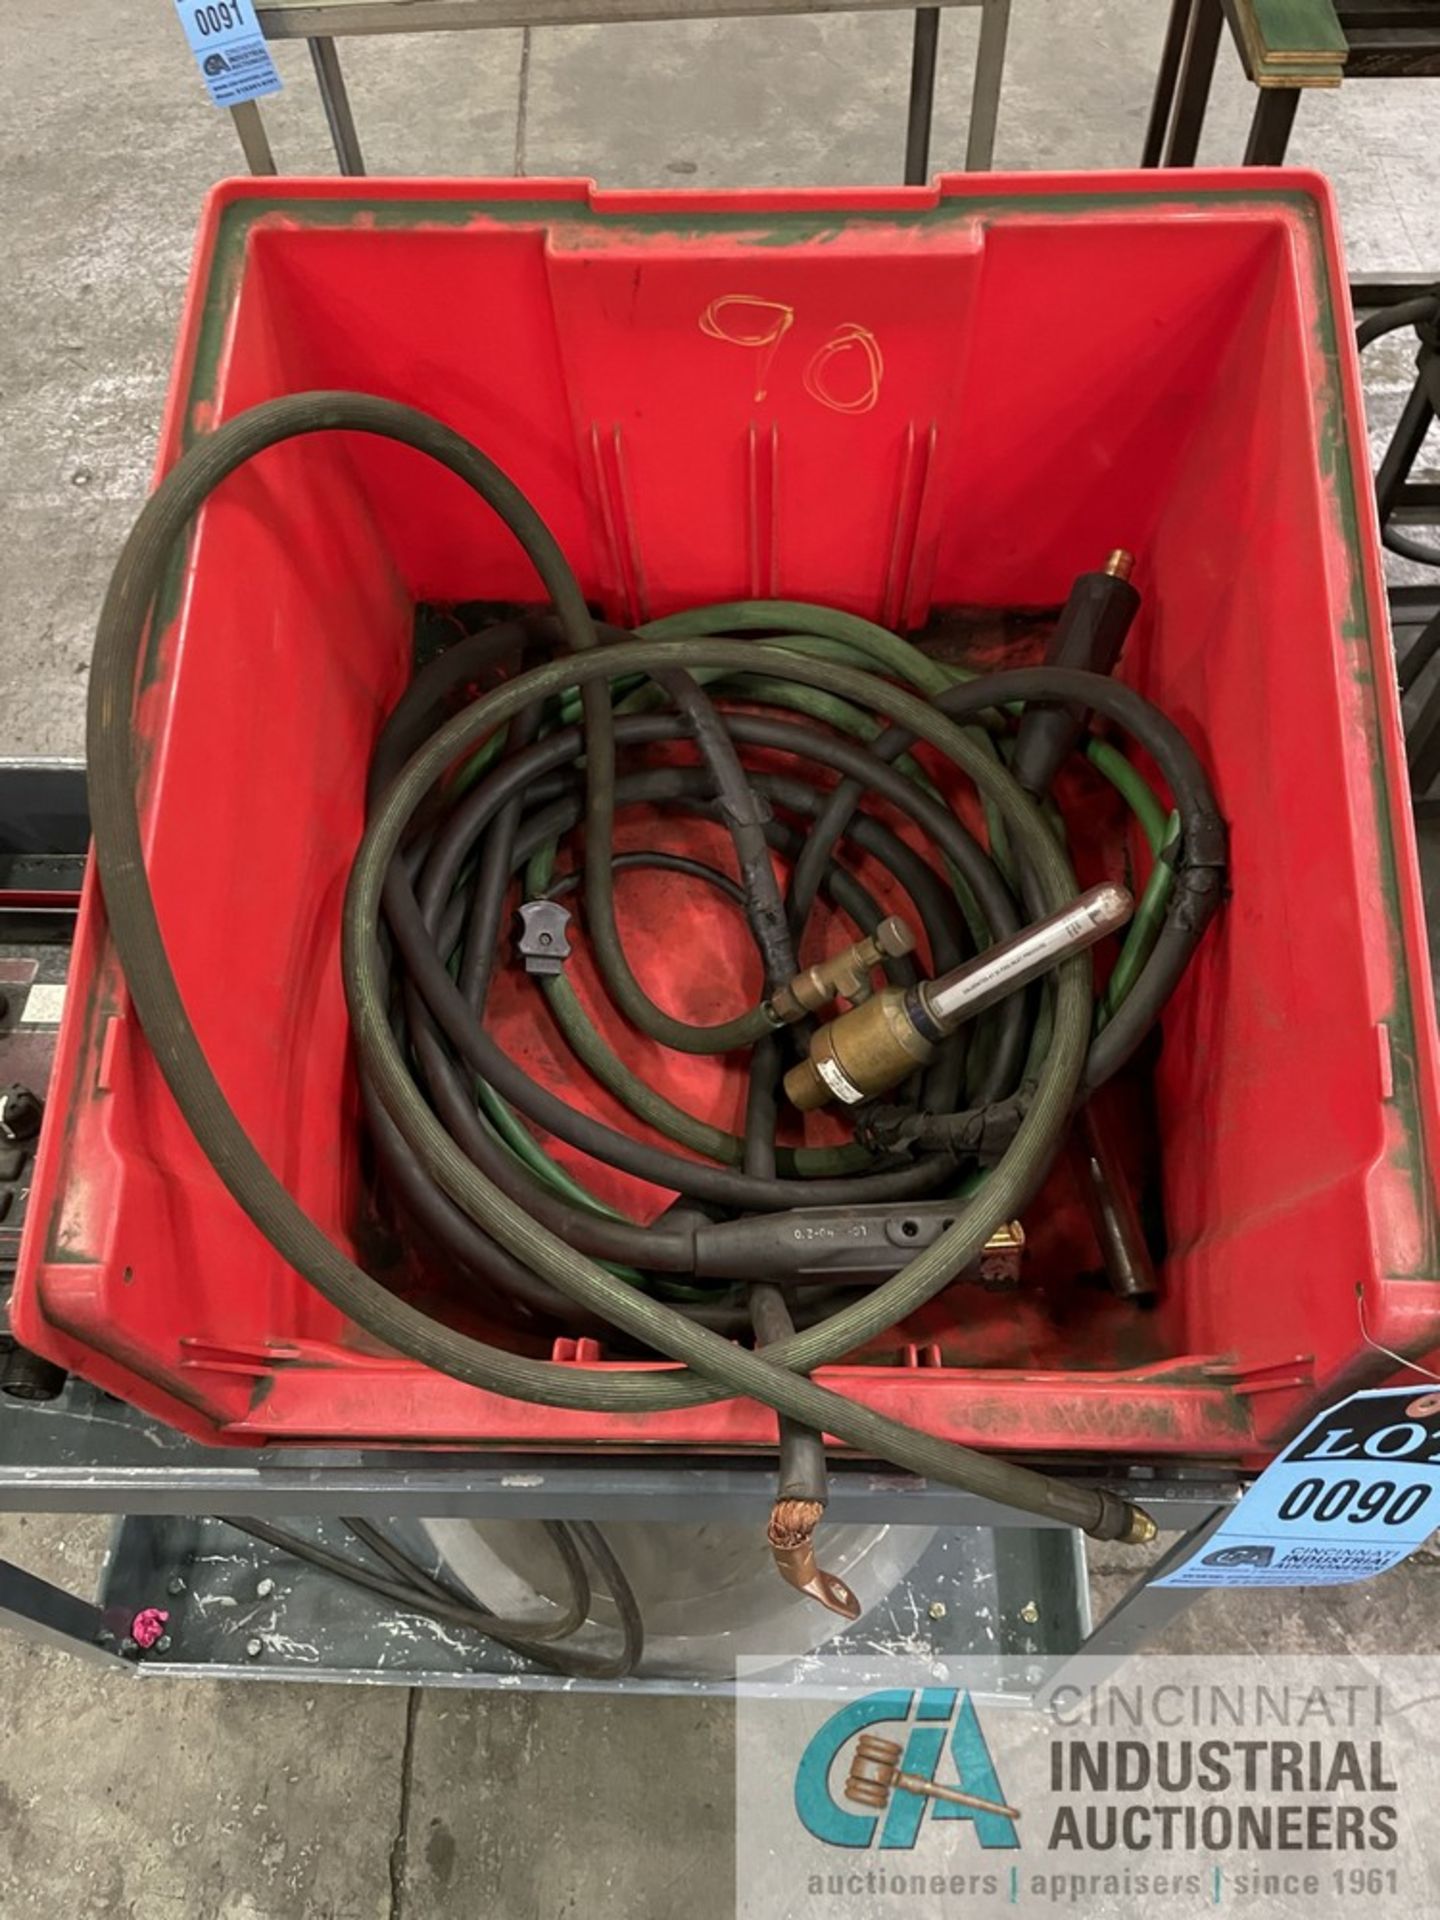 CART WITH LINCOLN POWER FEED CONTROL AND WELDING HEADS AND HOSE - Image 3 of 5